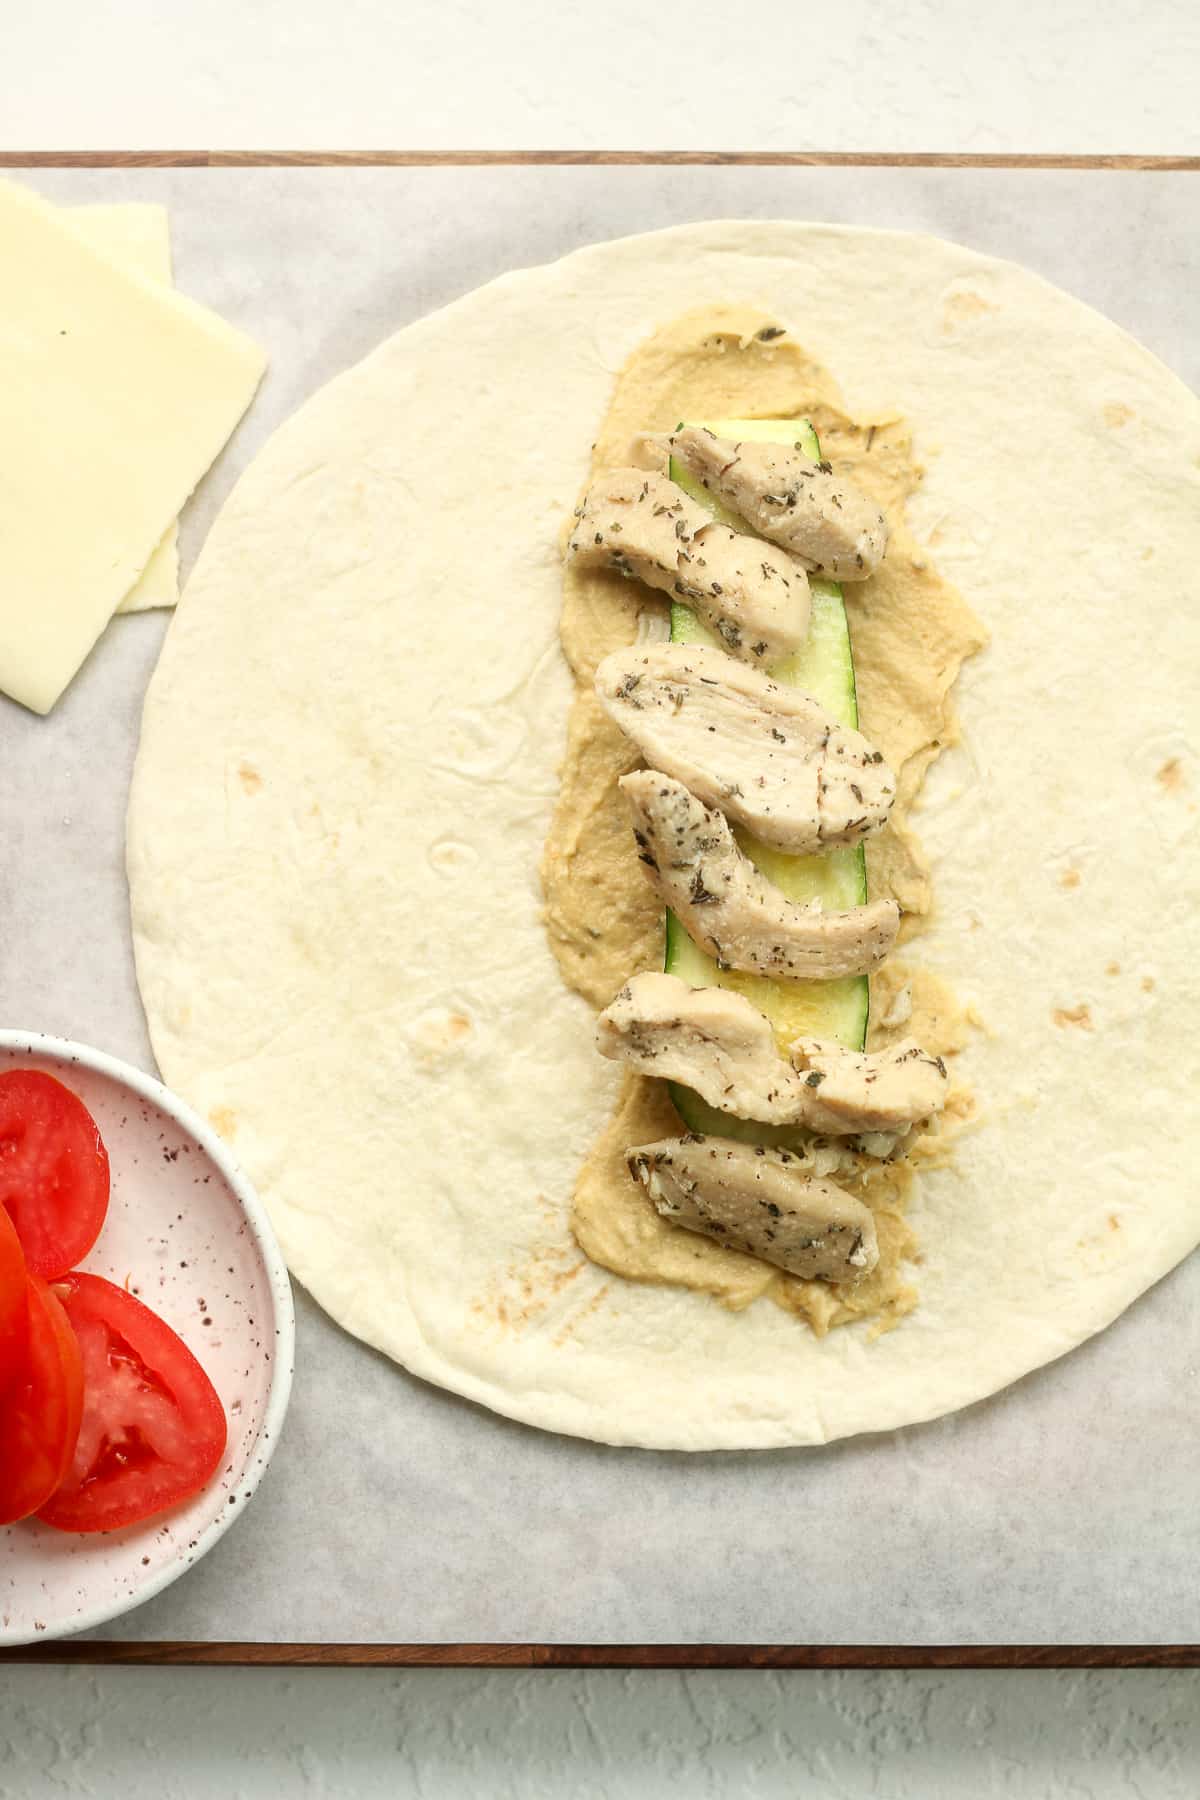 A tortilla with hummus, zucchini, and chicken slices.